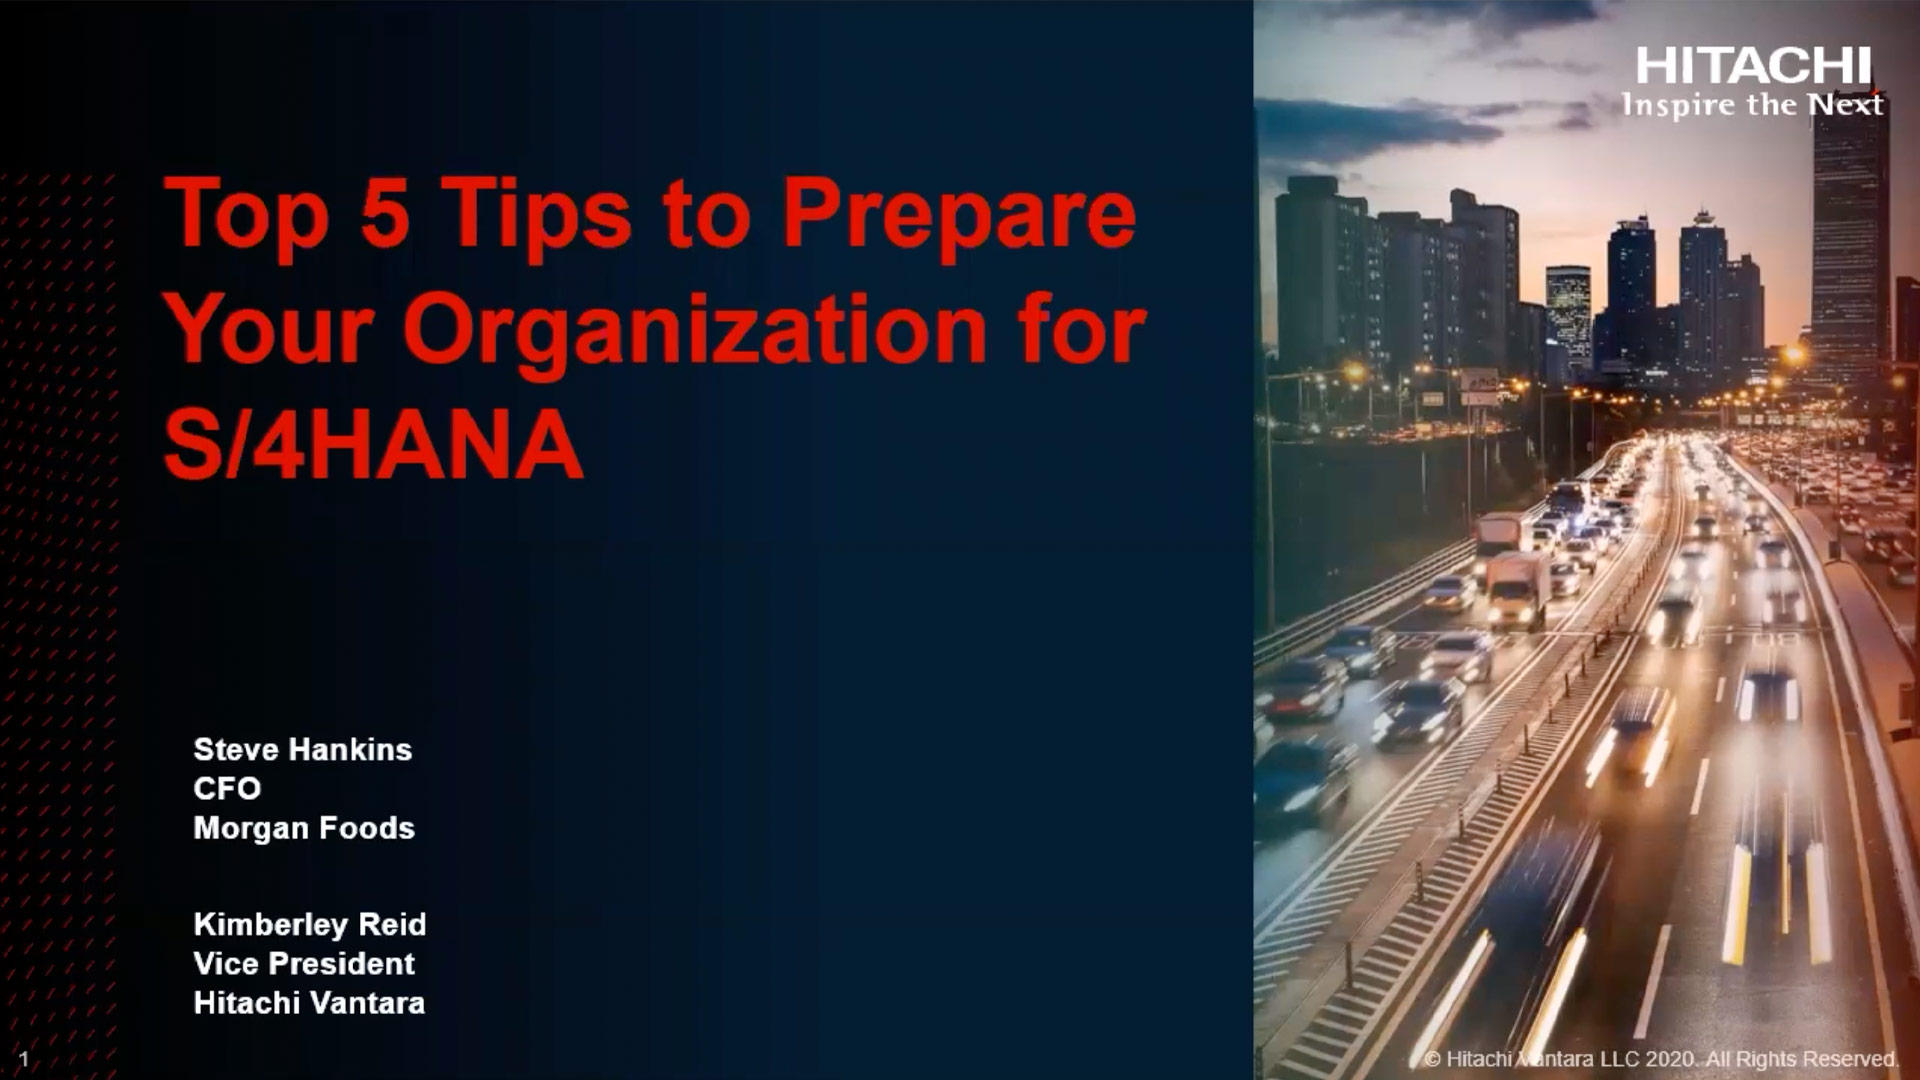 Top 5 Tips for Prepare your Organization for S/4HANA